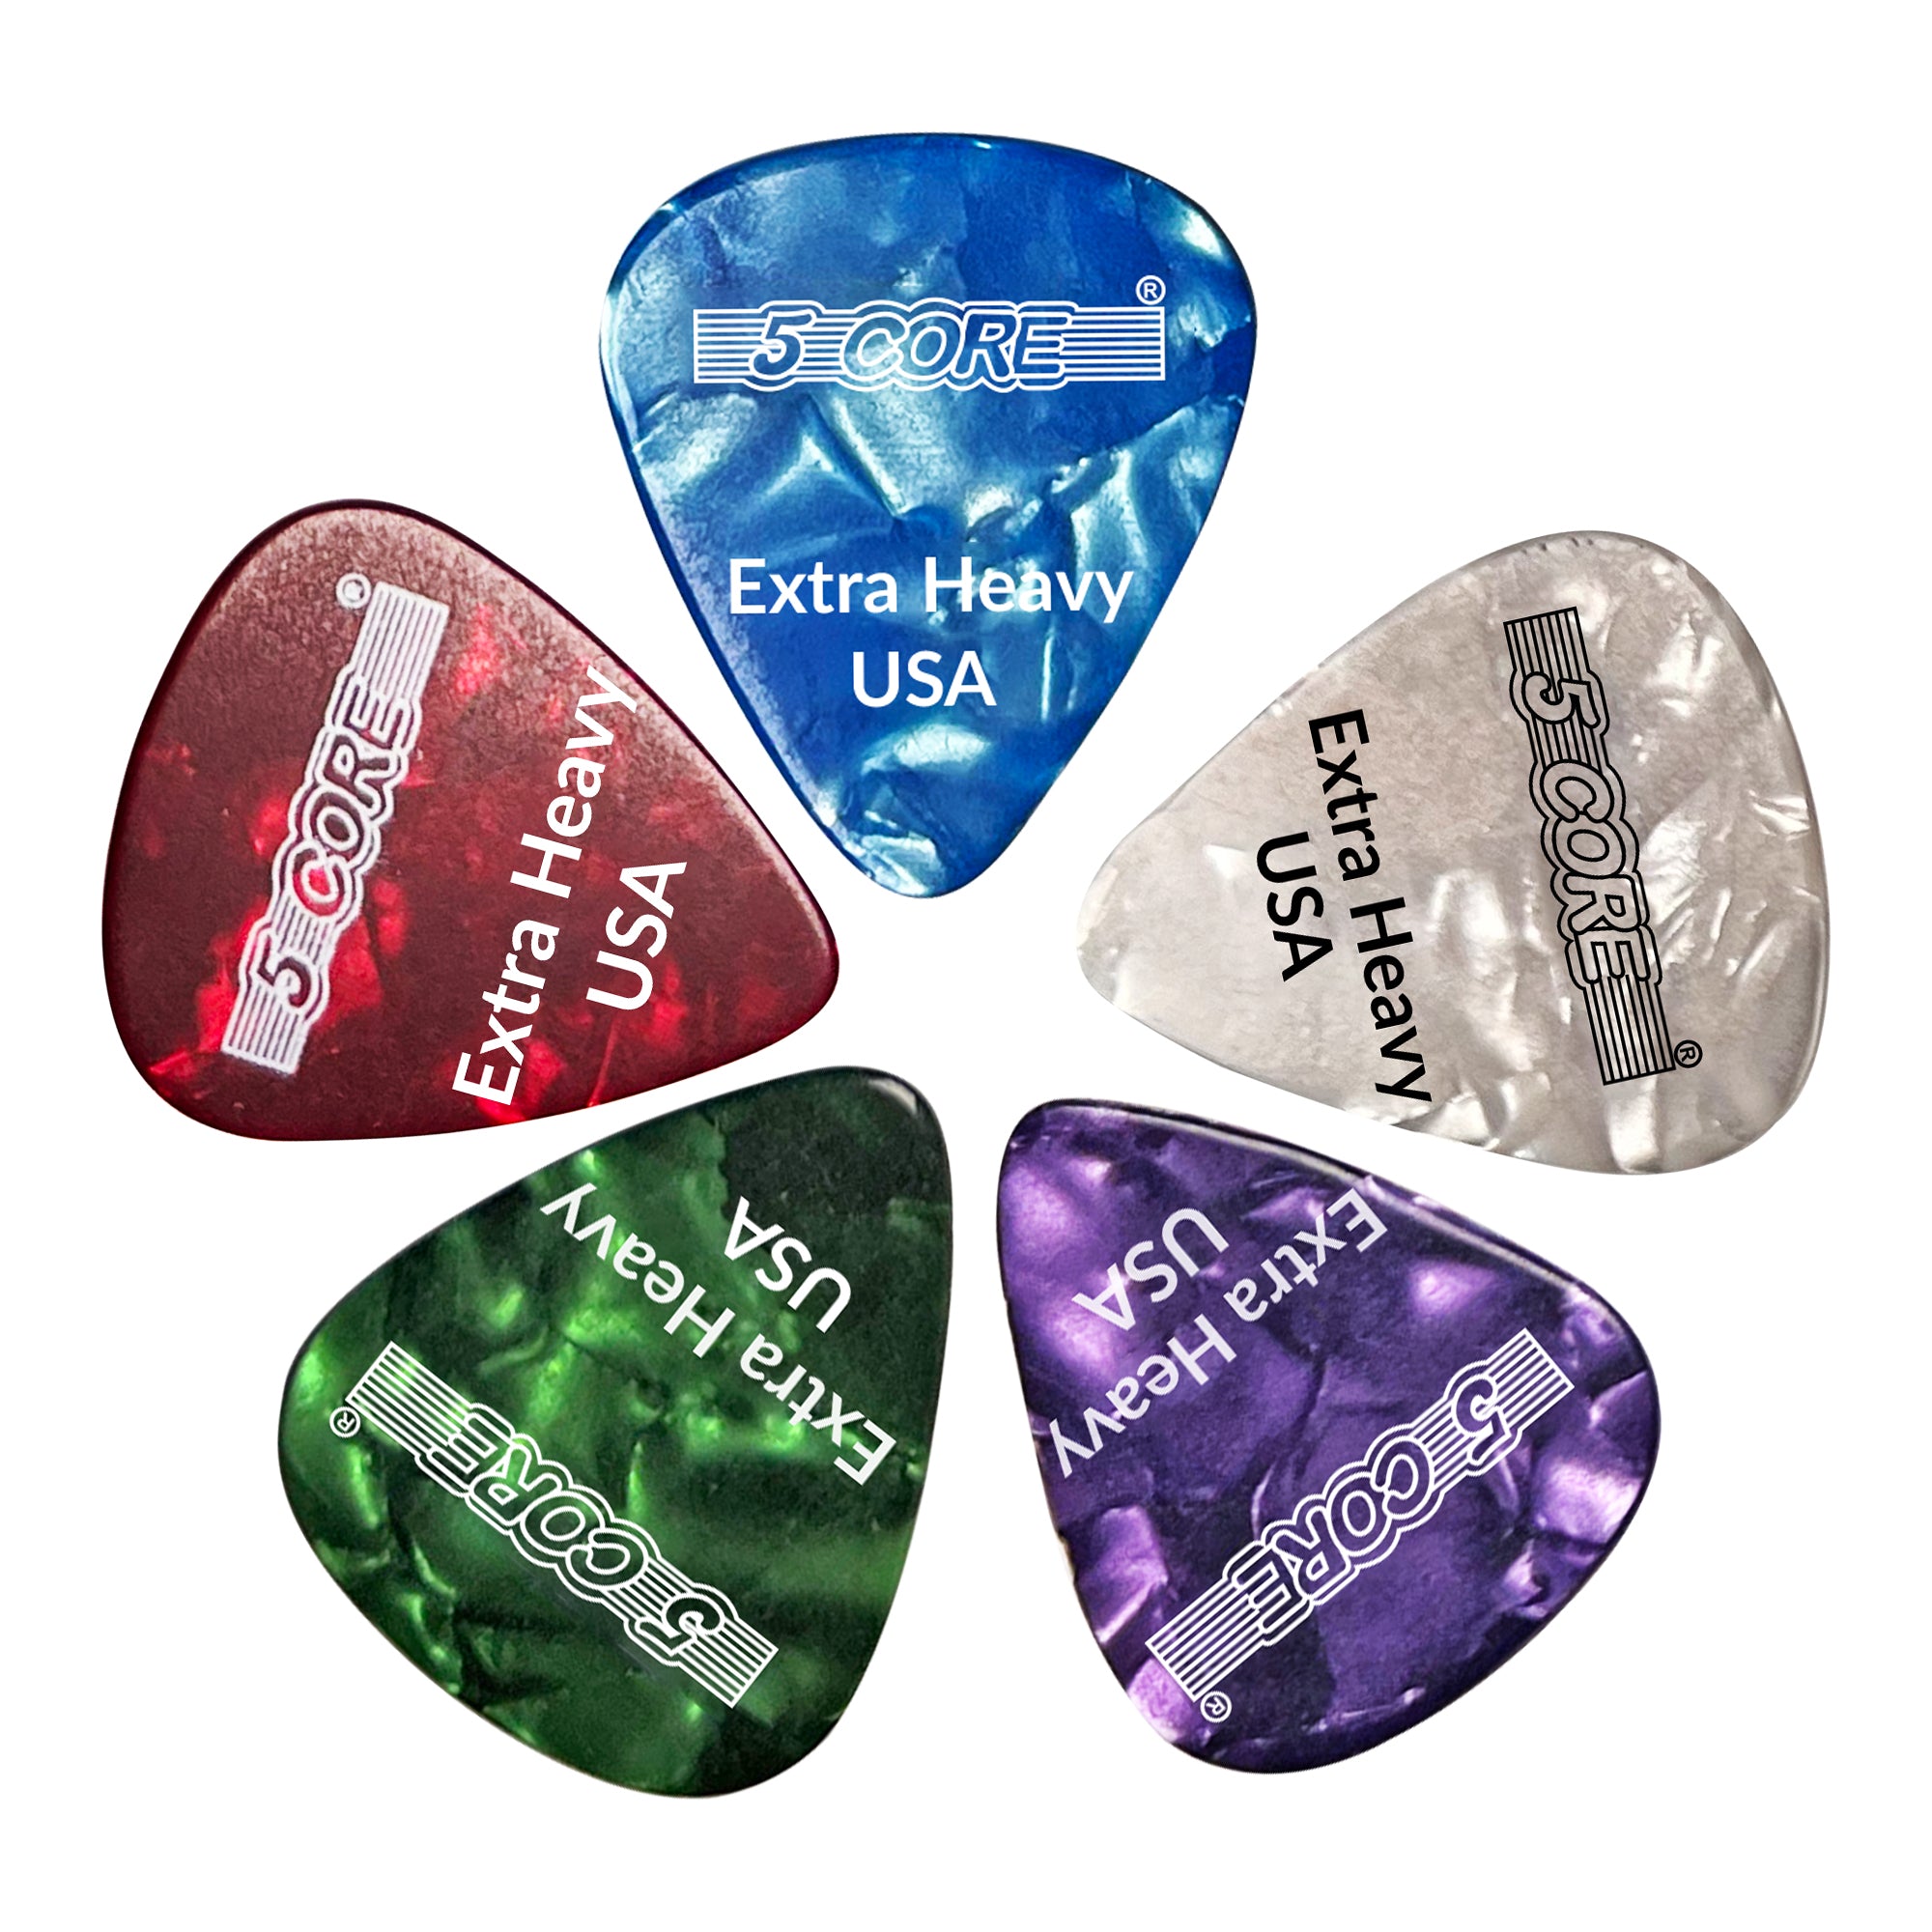 5 Core Guitar Picks 20Pc Pick for Bass Electric Acoustic Guitars Extra Heavy Gauge Durable Celluloid Guitar Picks 1.2mm 4x Red -G PICK EXH RGWPB 20PK